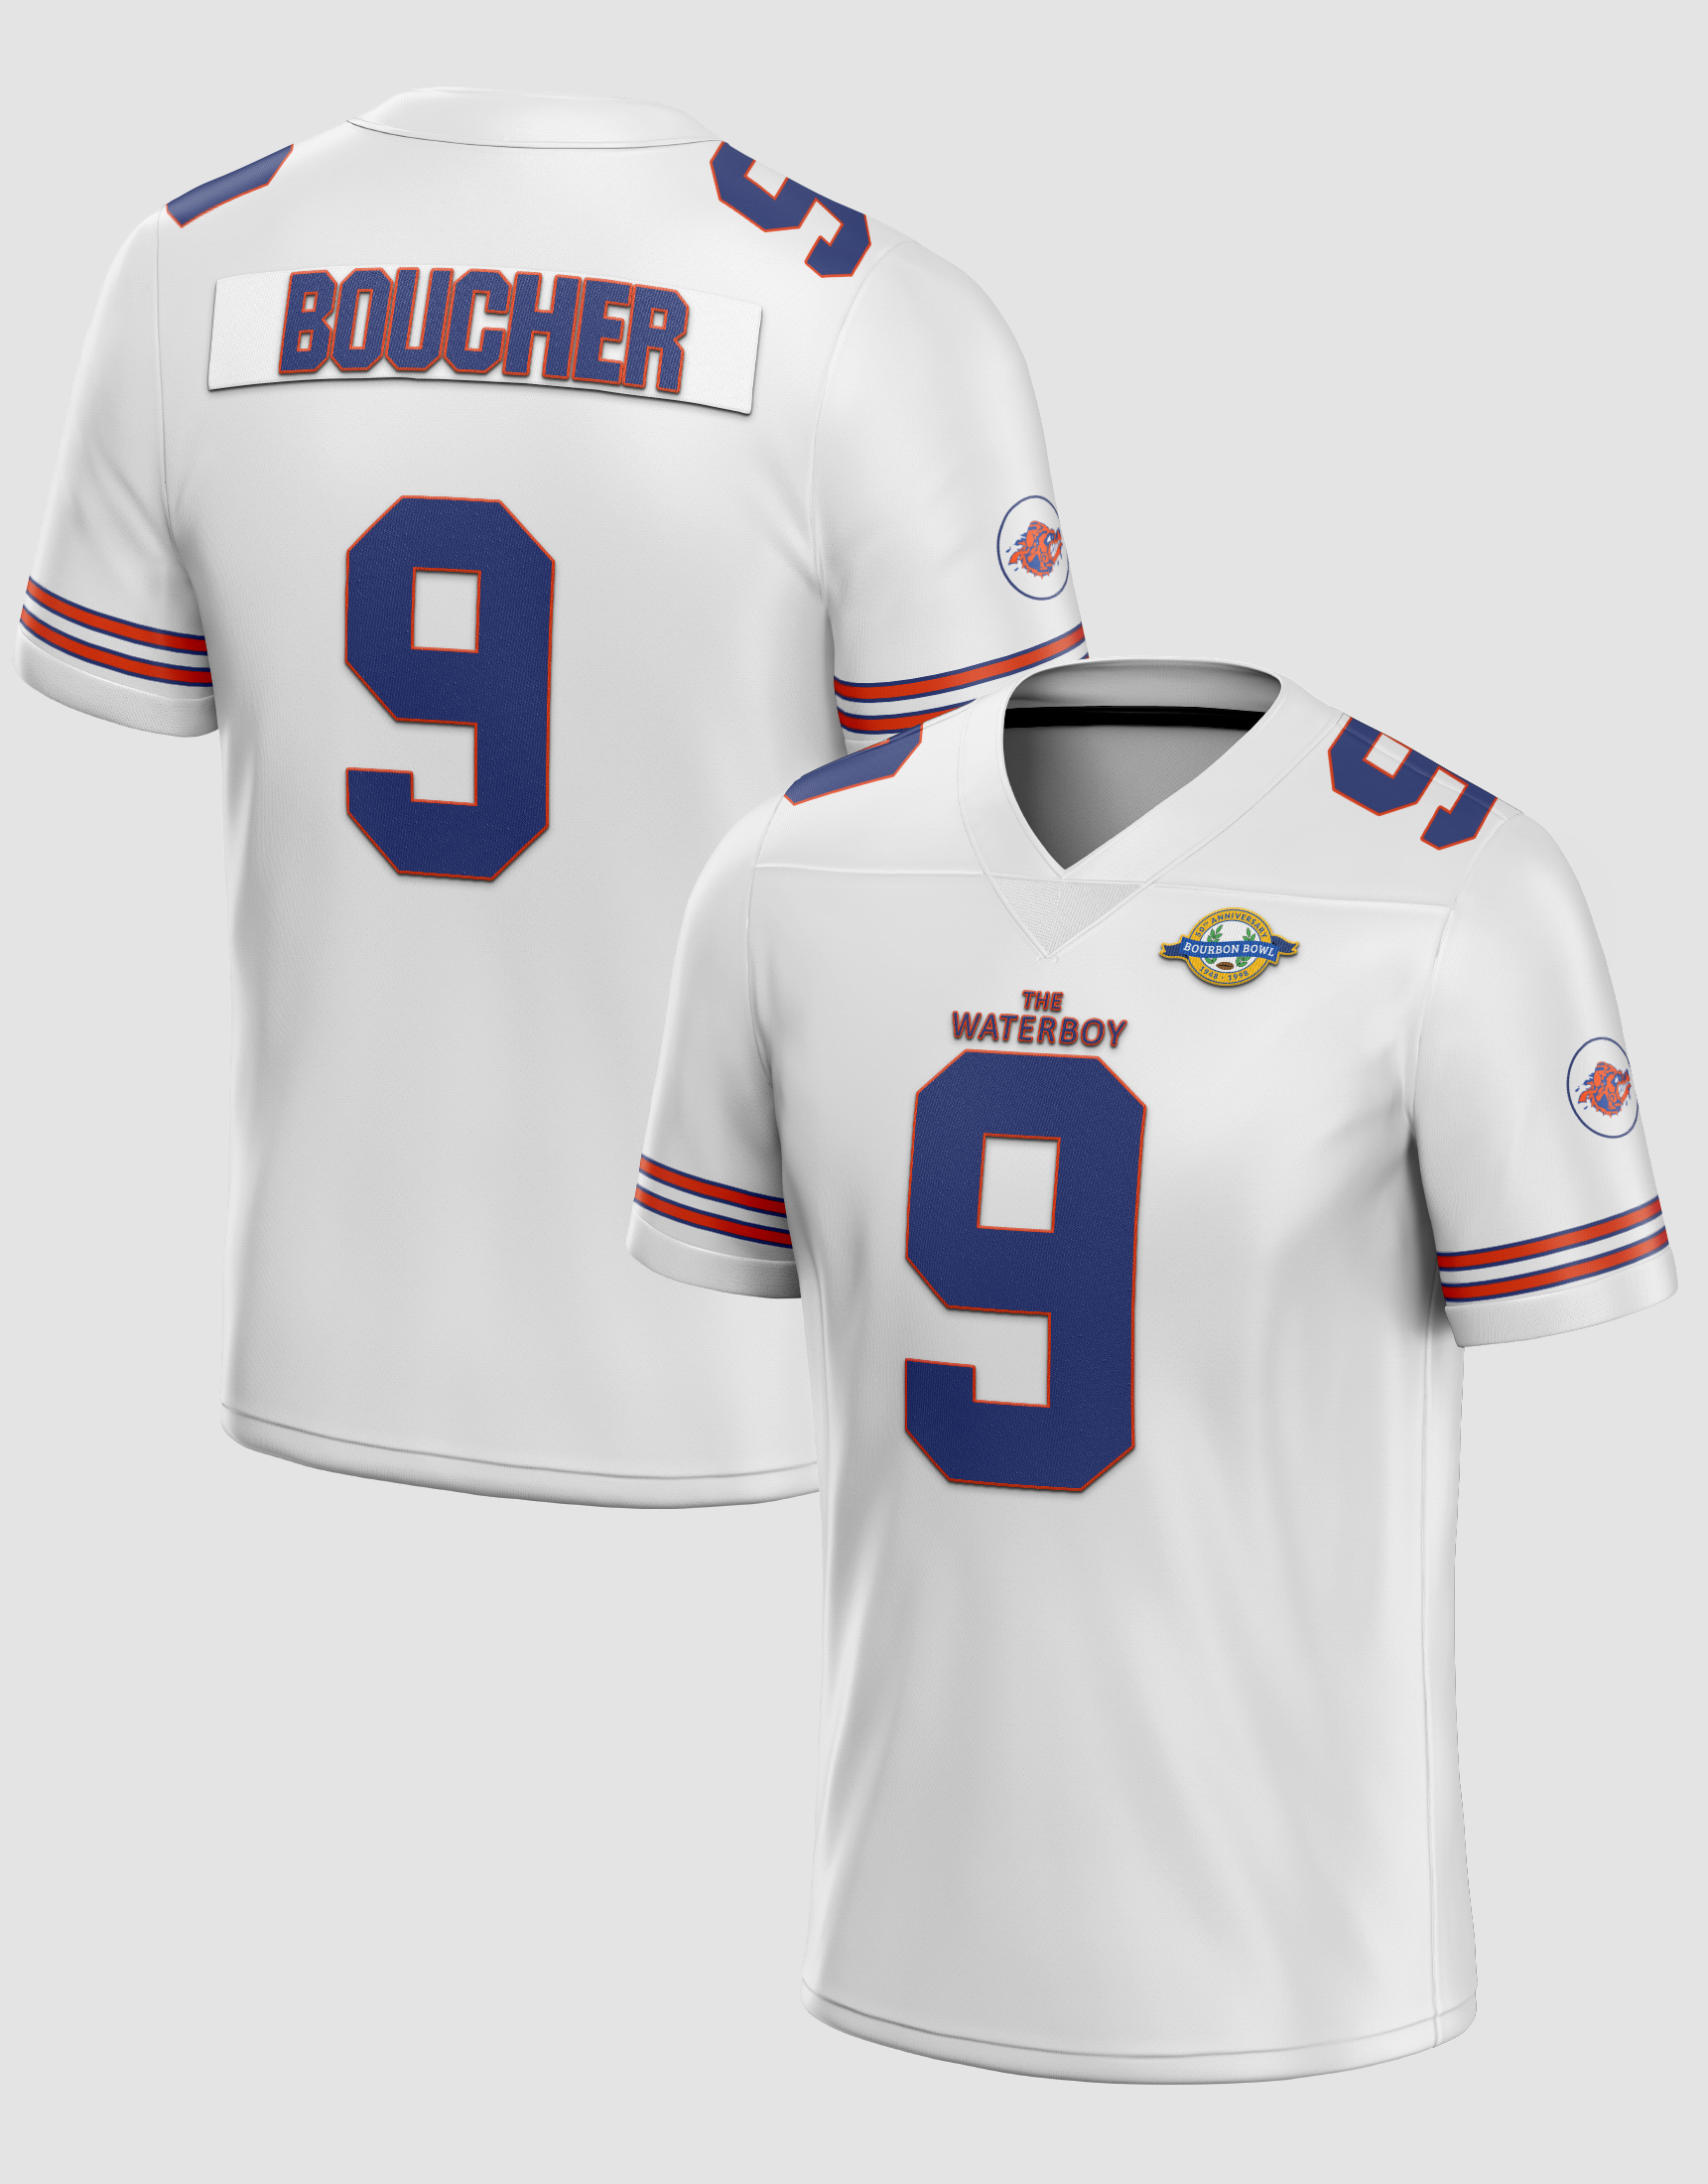  Boriz Sandler Bobby Boucher Waterboy Mud Dogs Football Jersey  With Bourbon Bowl Patch (42, Blue) : Clothing, Shoes & Jewelry